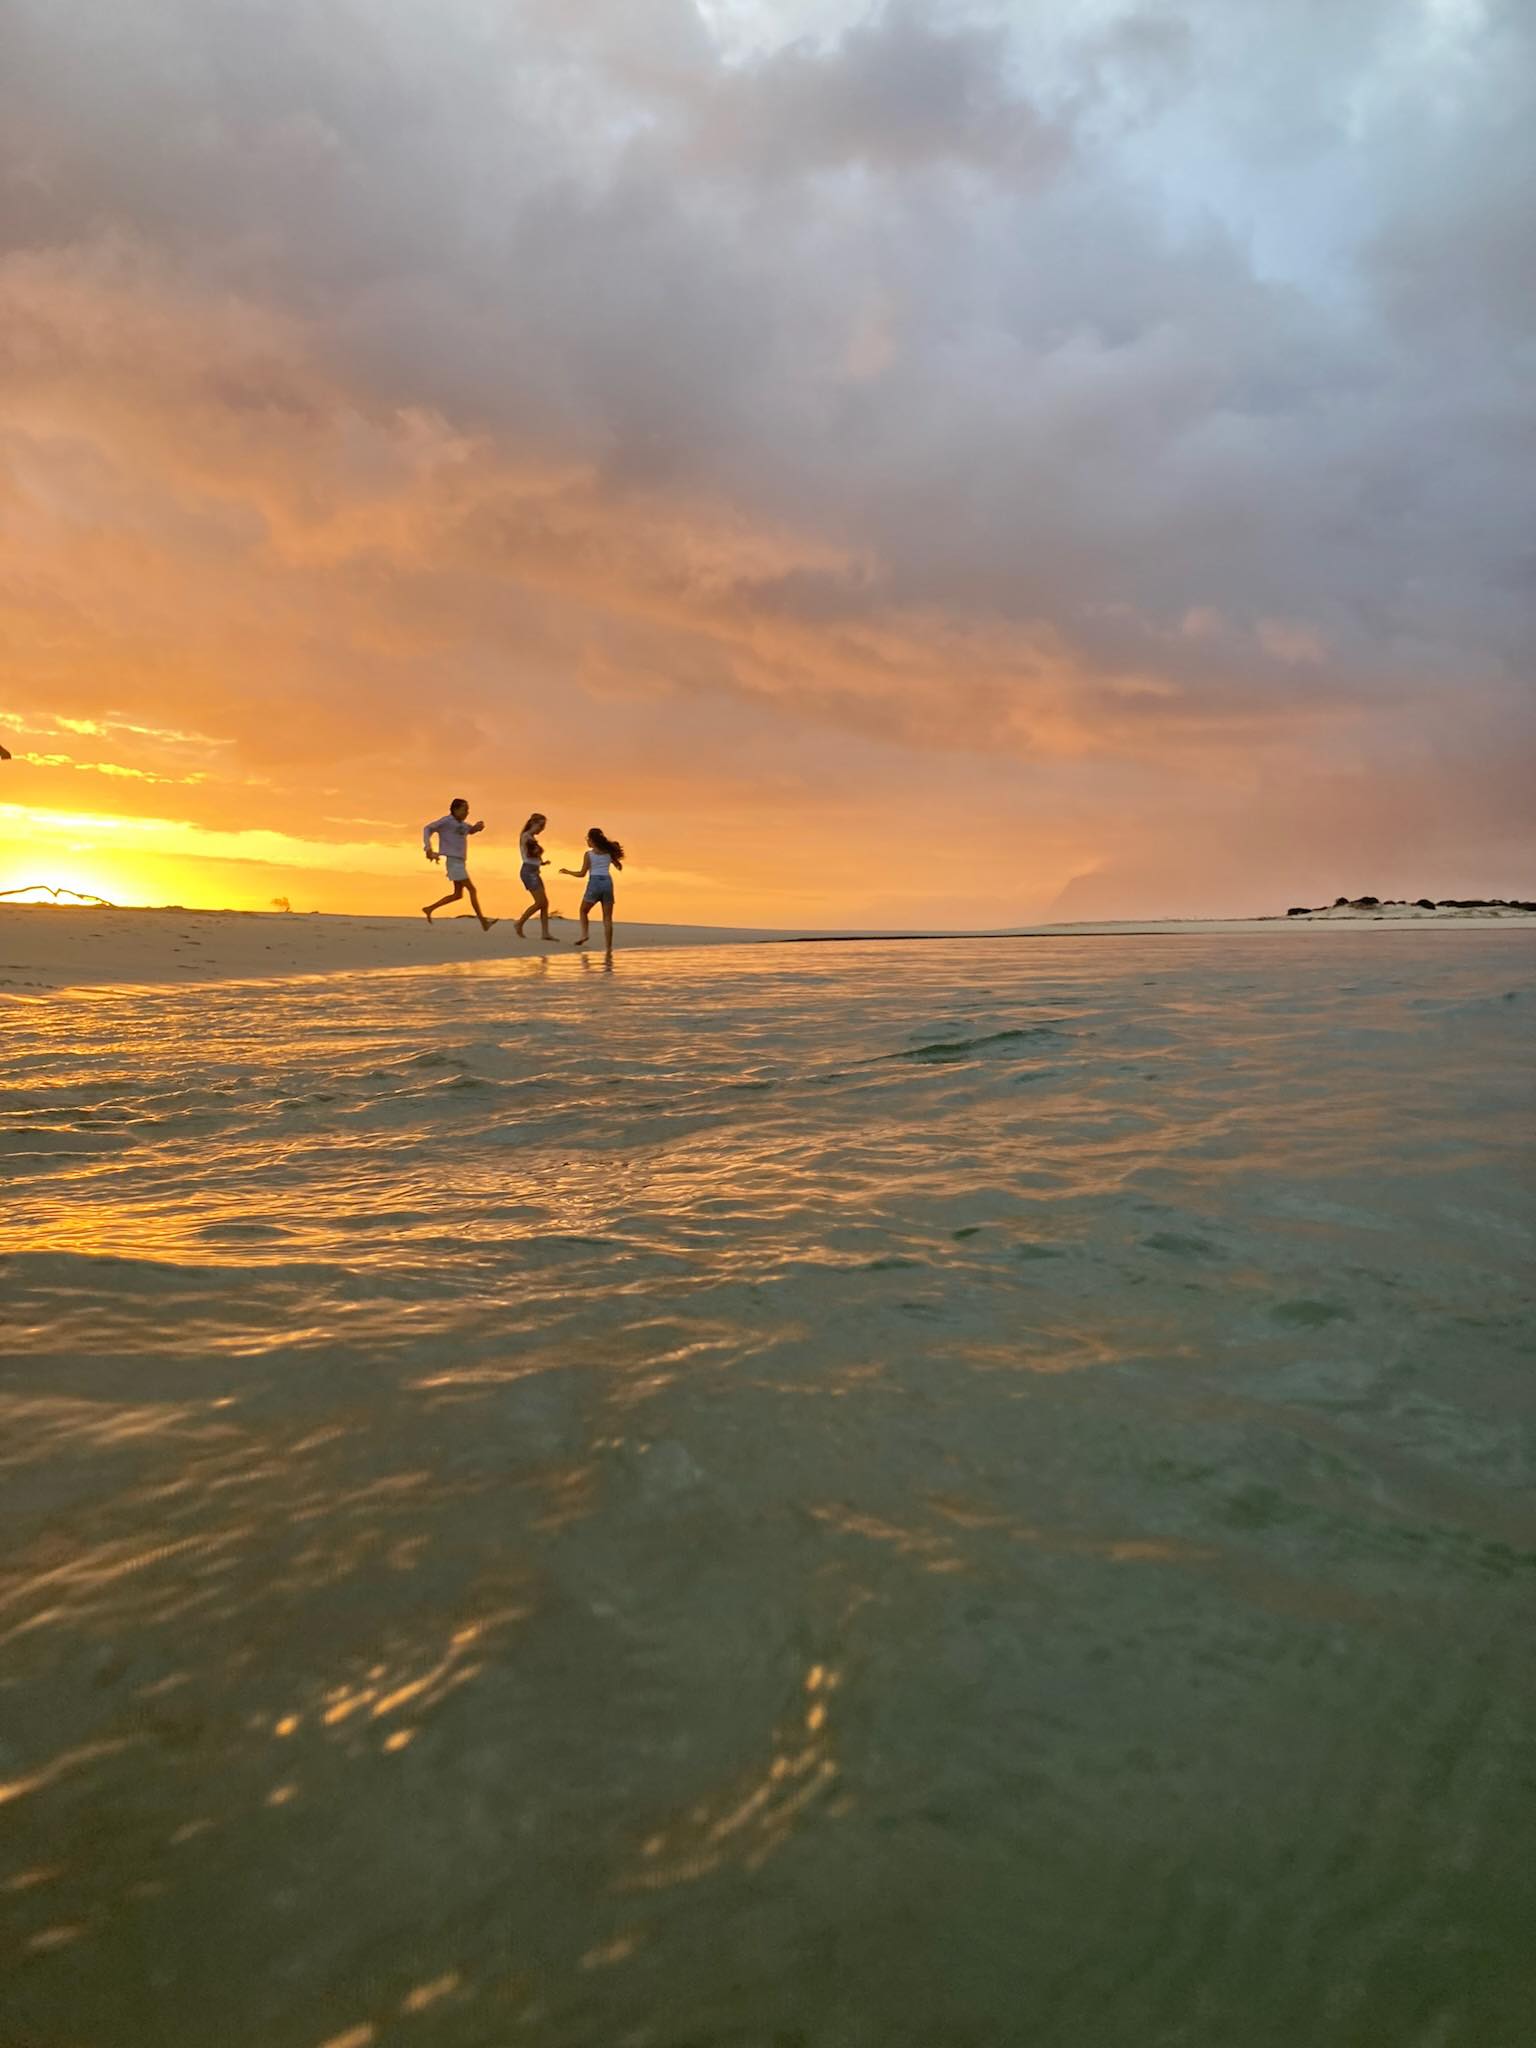 Children playing on a beach at sunset